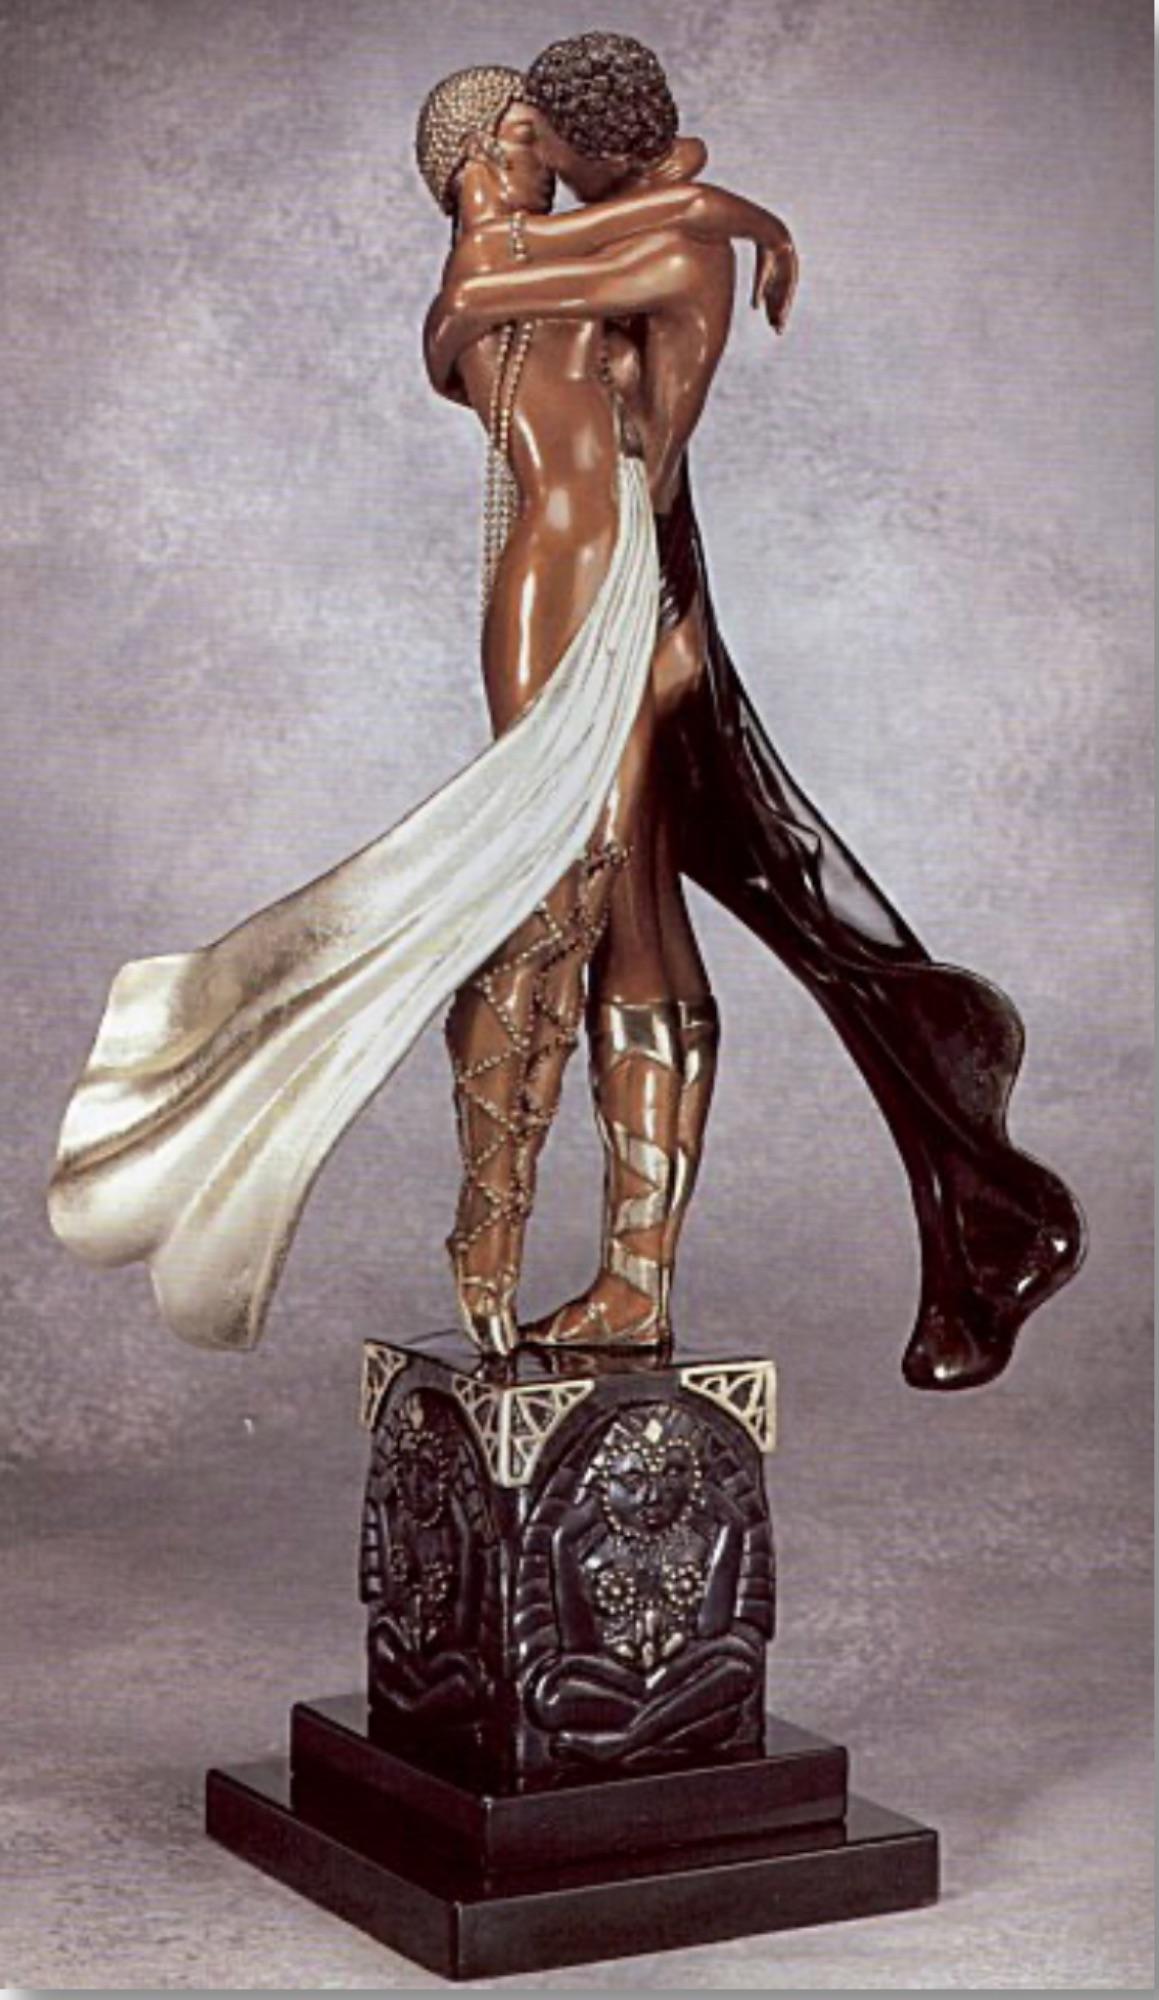 Artist: Erte, Romain de Tirtoff (1892-1990)
Title: Lovers and Idol
Year: 1990
Medium: Bronze
Edition: 375 Numbered, 37 AP
Size: 20 x 10 x 7 inches
Condition: Excellent
Inscription: Incised with the artist's signature & edition number.

ERTE